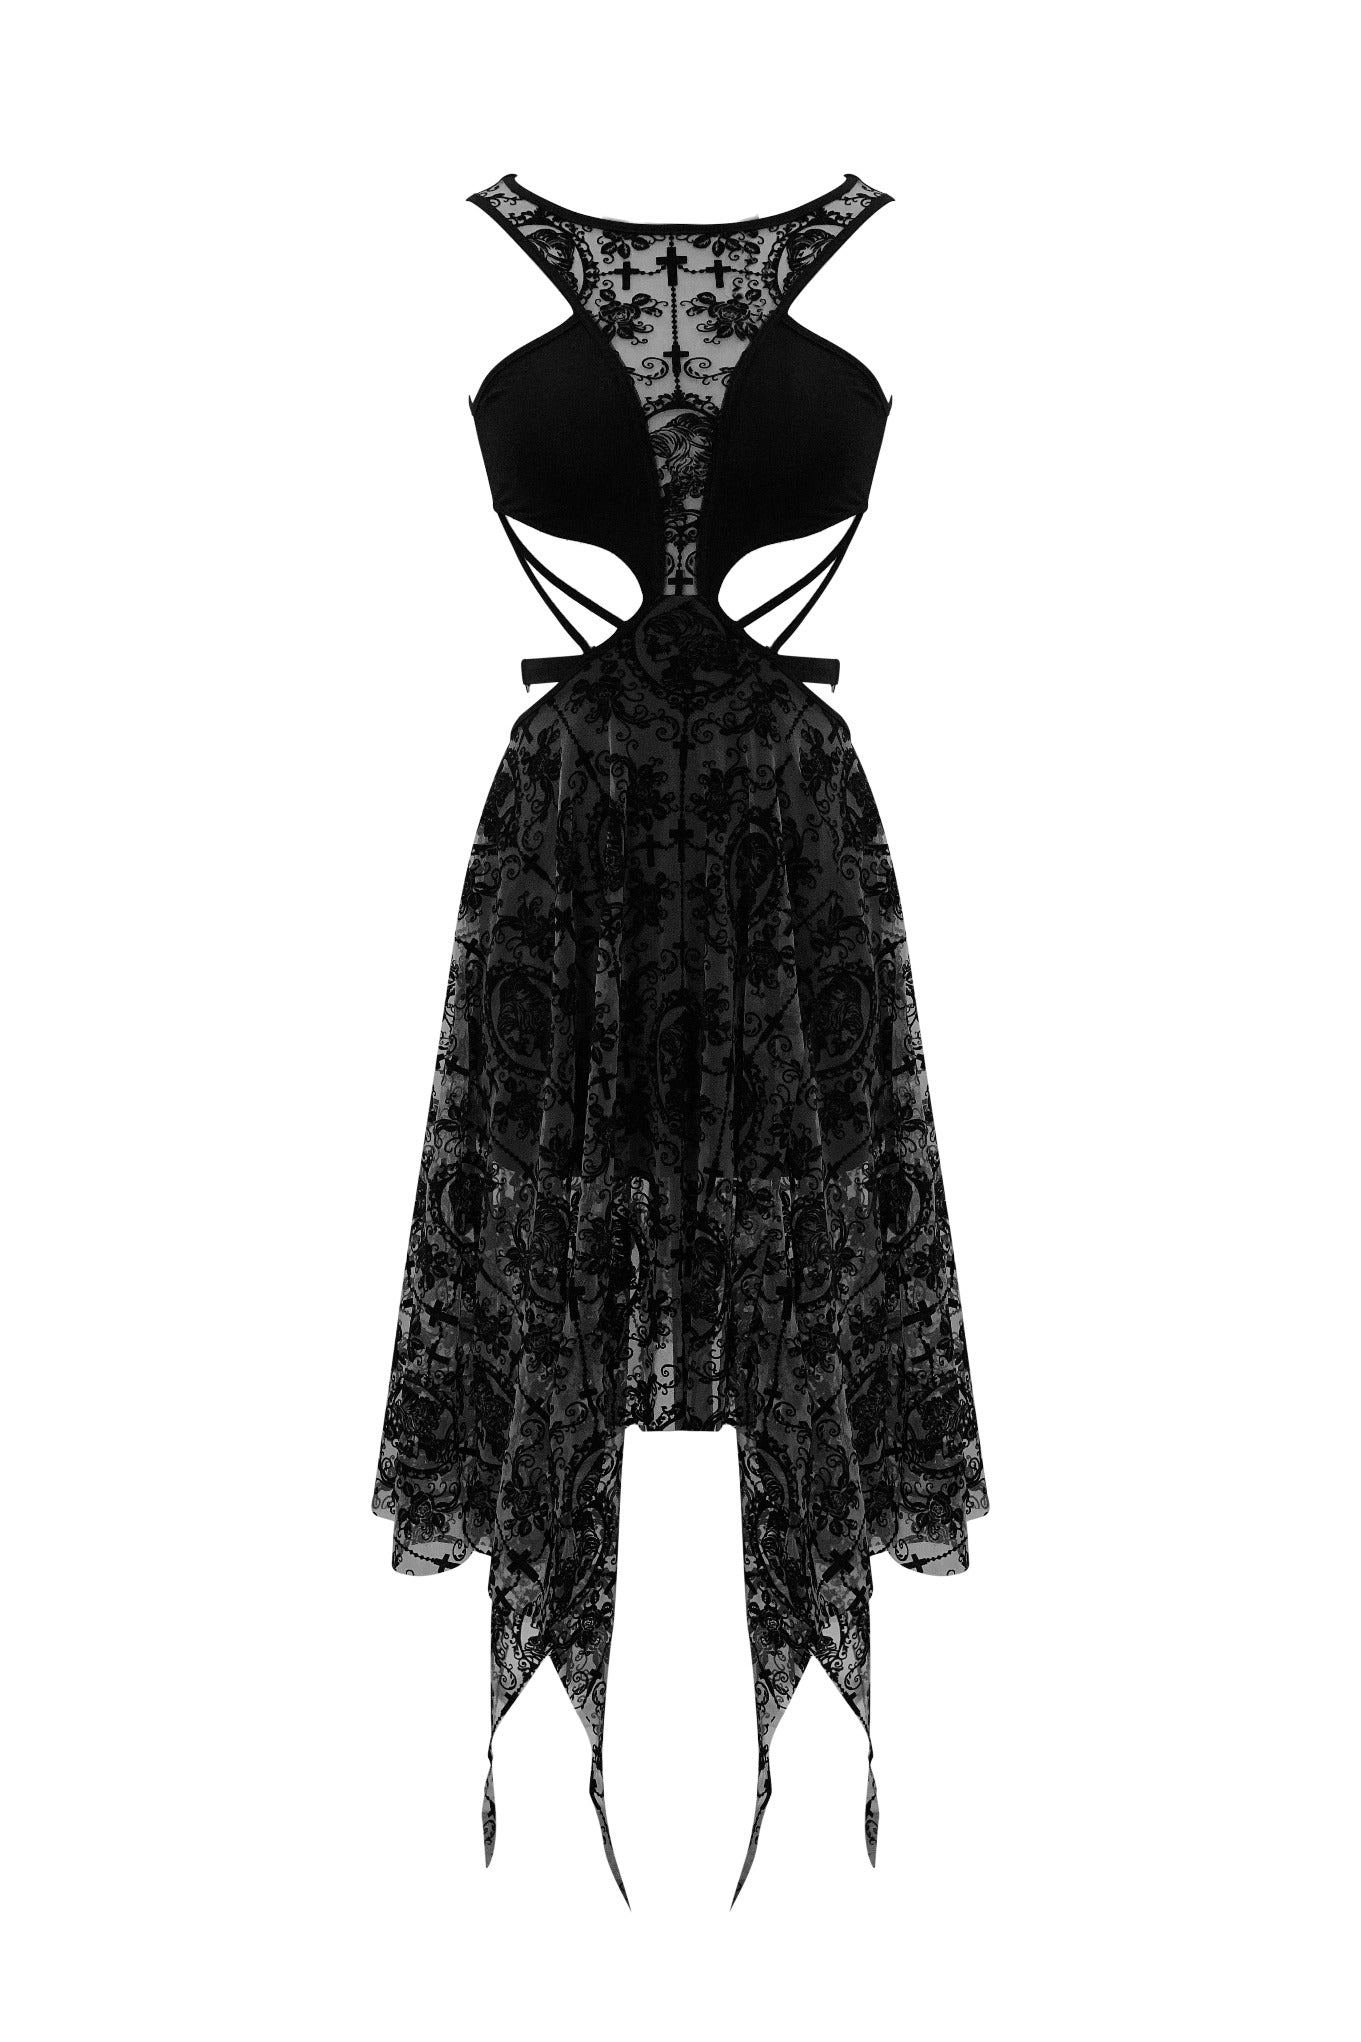 The Lace Cameo Butterfly Dress